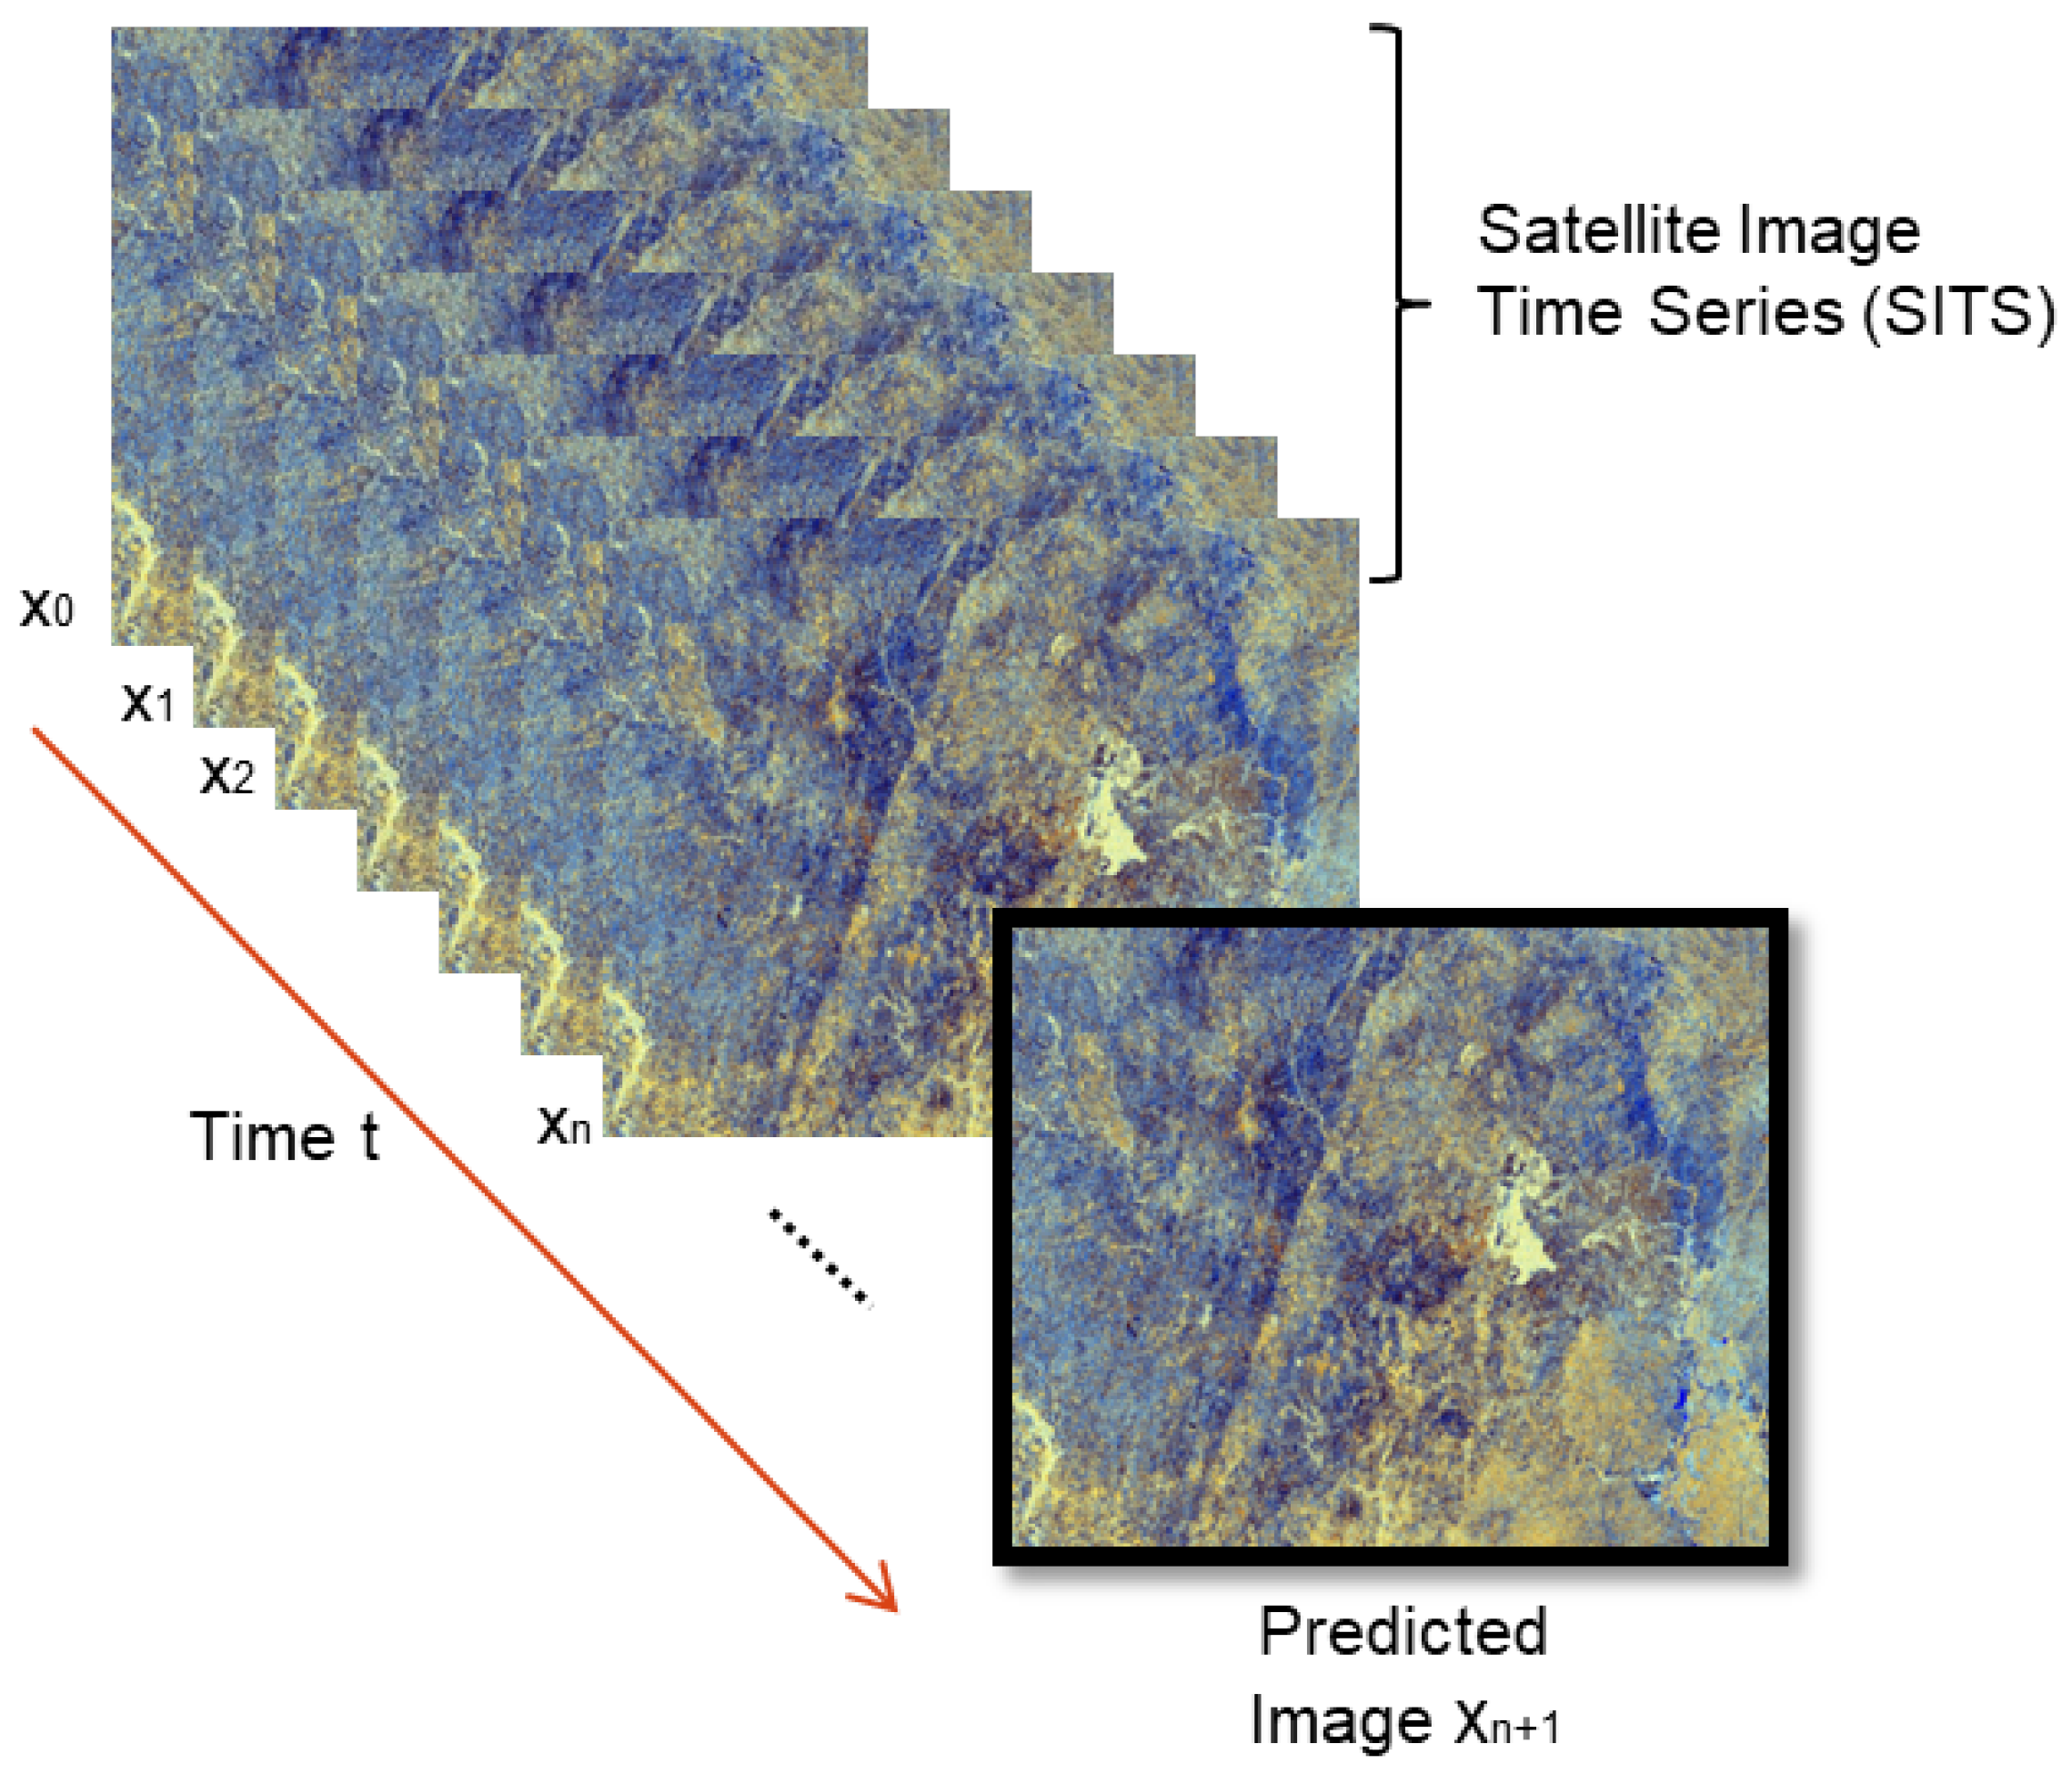 Remote Sensing | Free Full-Text | Application of Deep Learning  Architectures for Satellite Image Time Series Prediction: A Review | HTML